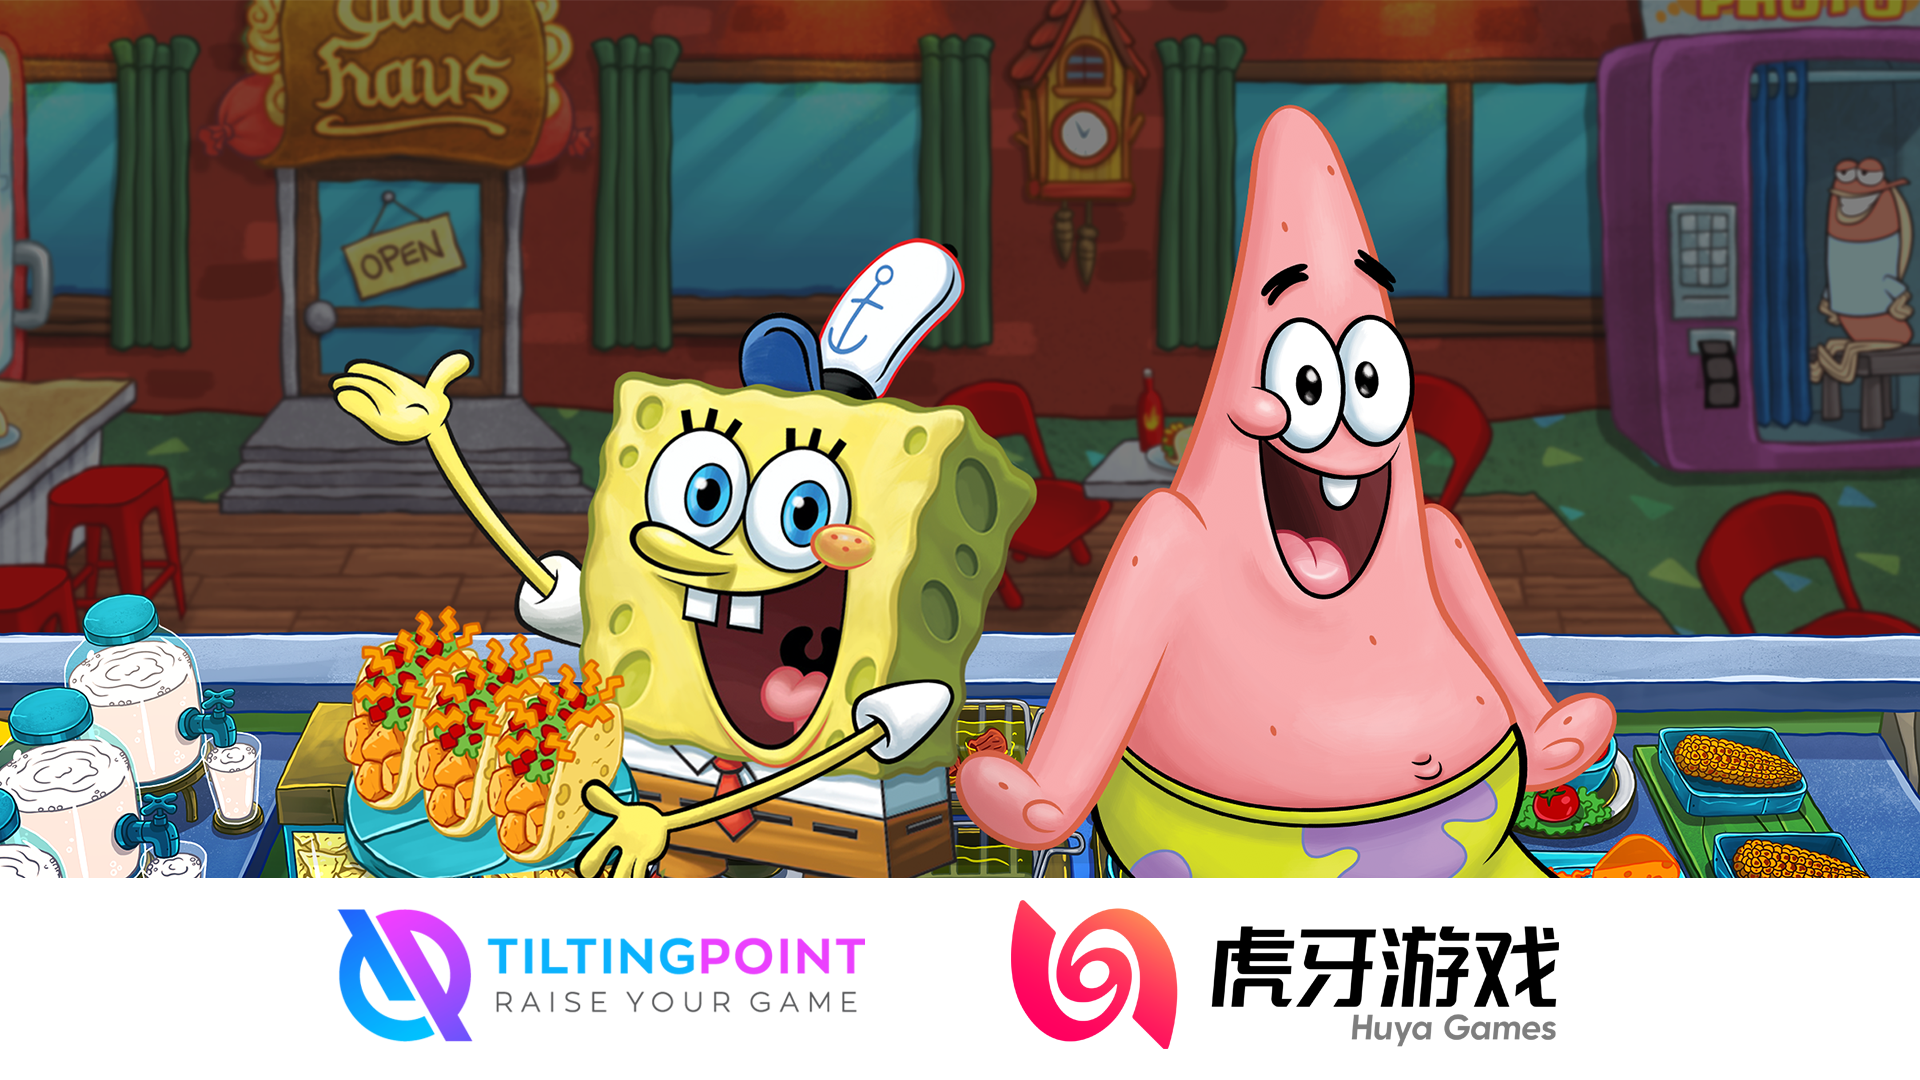 Image of SpongeBob characters in a restaurant standing behind logos of two gaming companies